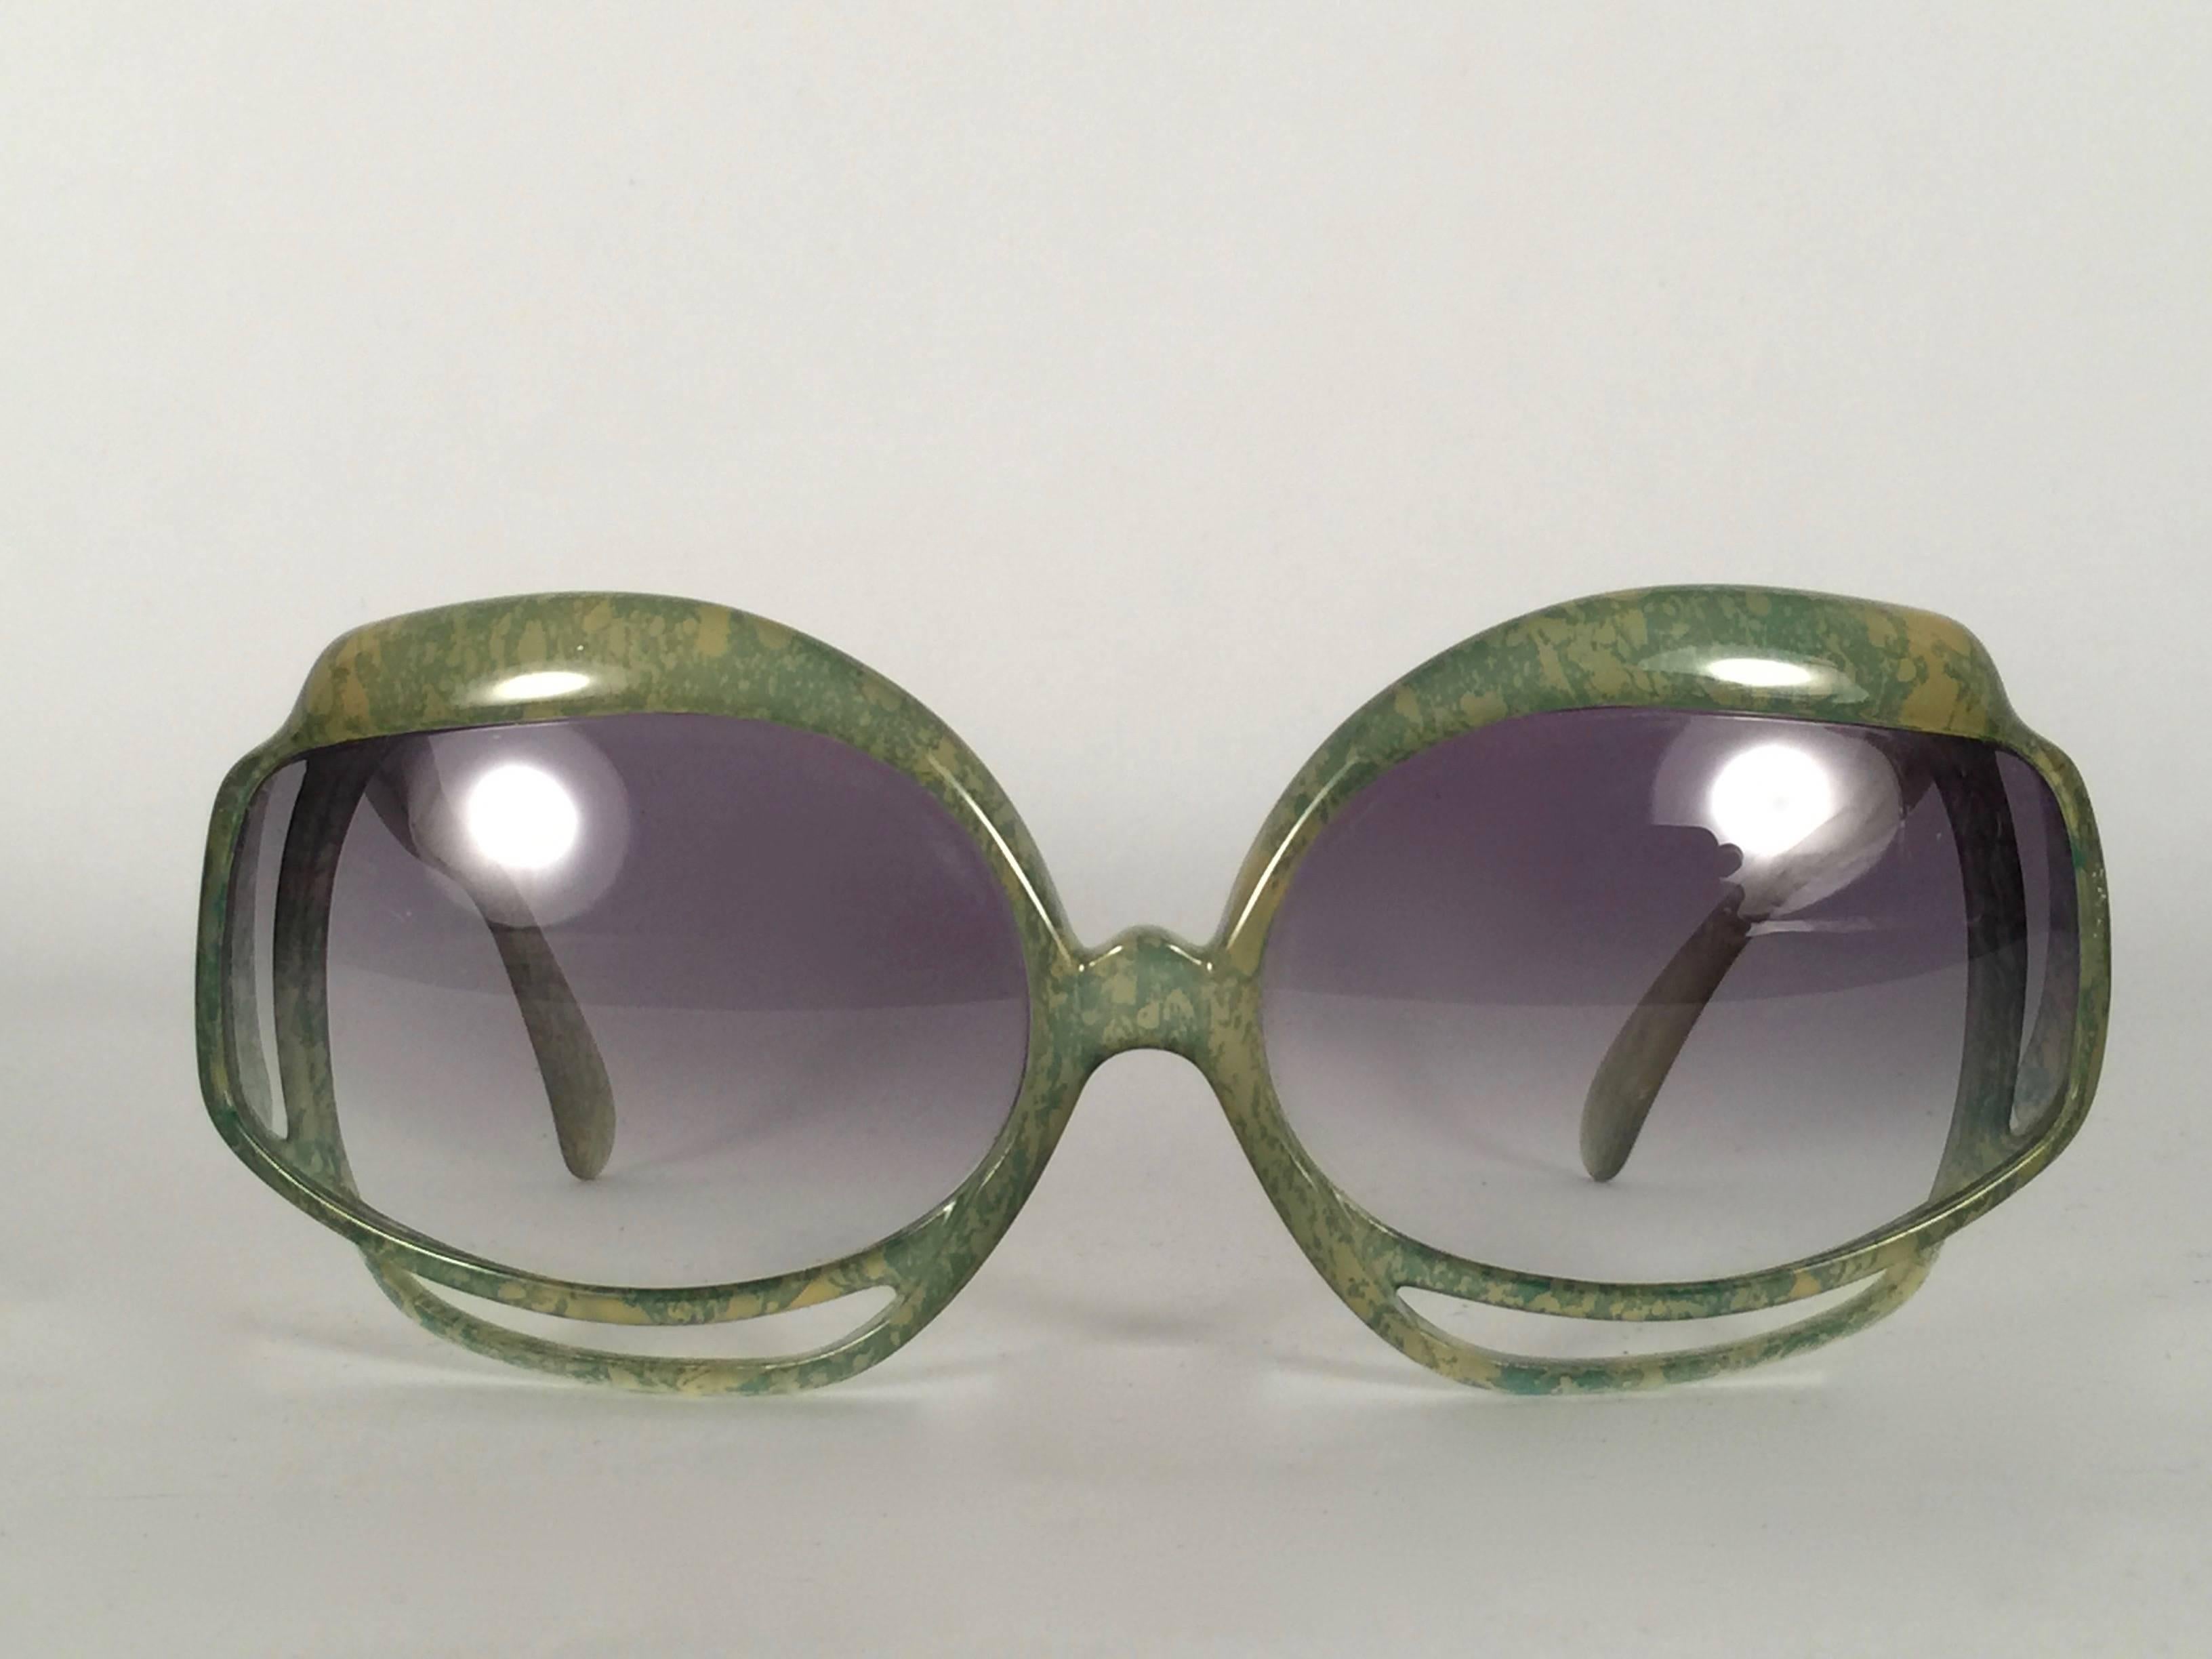 New Vintage Christian Dior 2026 60 JADE frame with spotless light gradient lenses.   Made in Germany.  Produced and design in 1970's.  This item may show minor sign of wear due to storage. A collector’s piece!  New, never worn or displayed. Comes